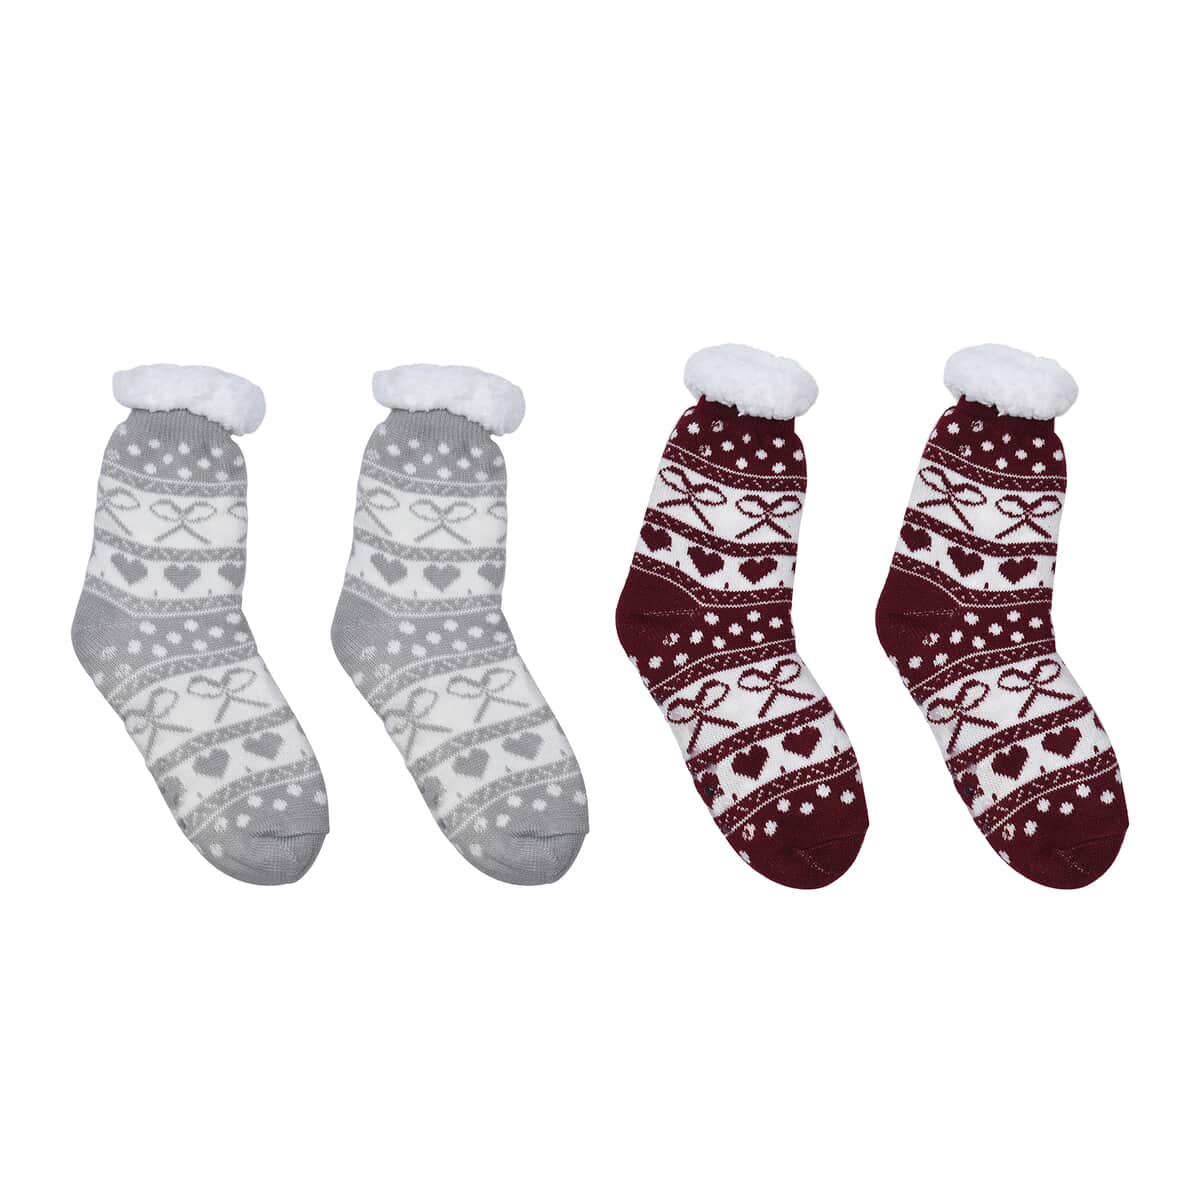 Homesmart Set of 2 Pairs Warm & Fuzzy Gray and Brown Bowknot and Heart Pattern Sherpa Lined Slipper Socks (Women's Size 5-10) with Anti Slip Rubber image number 0